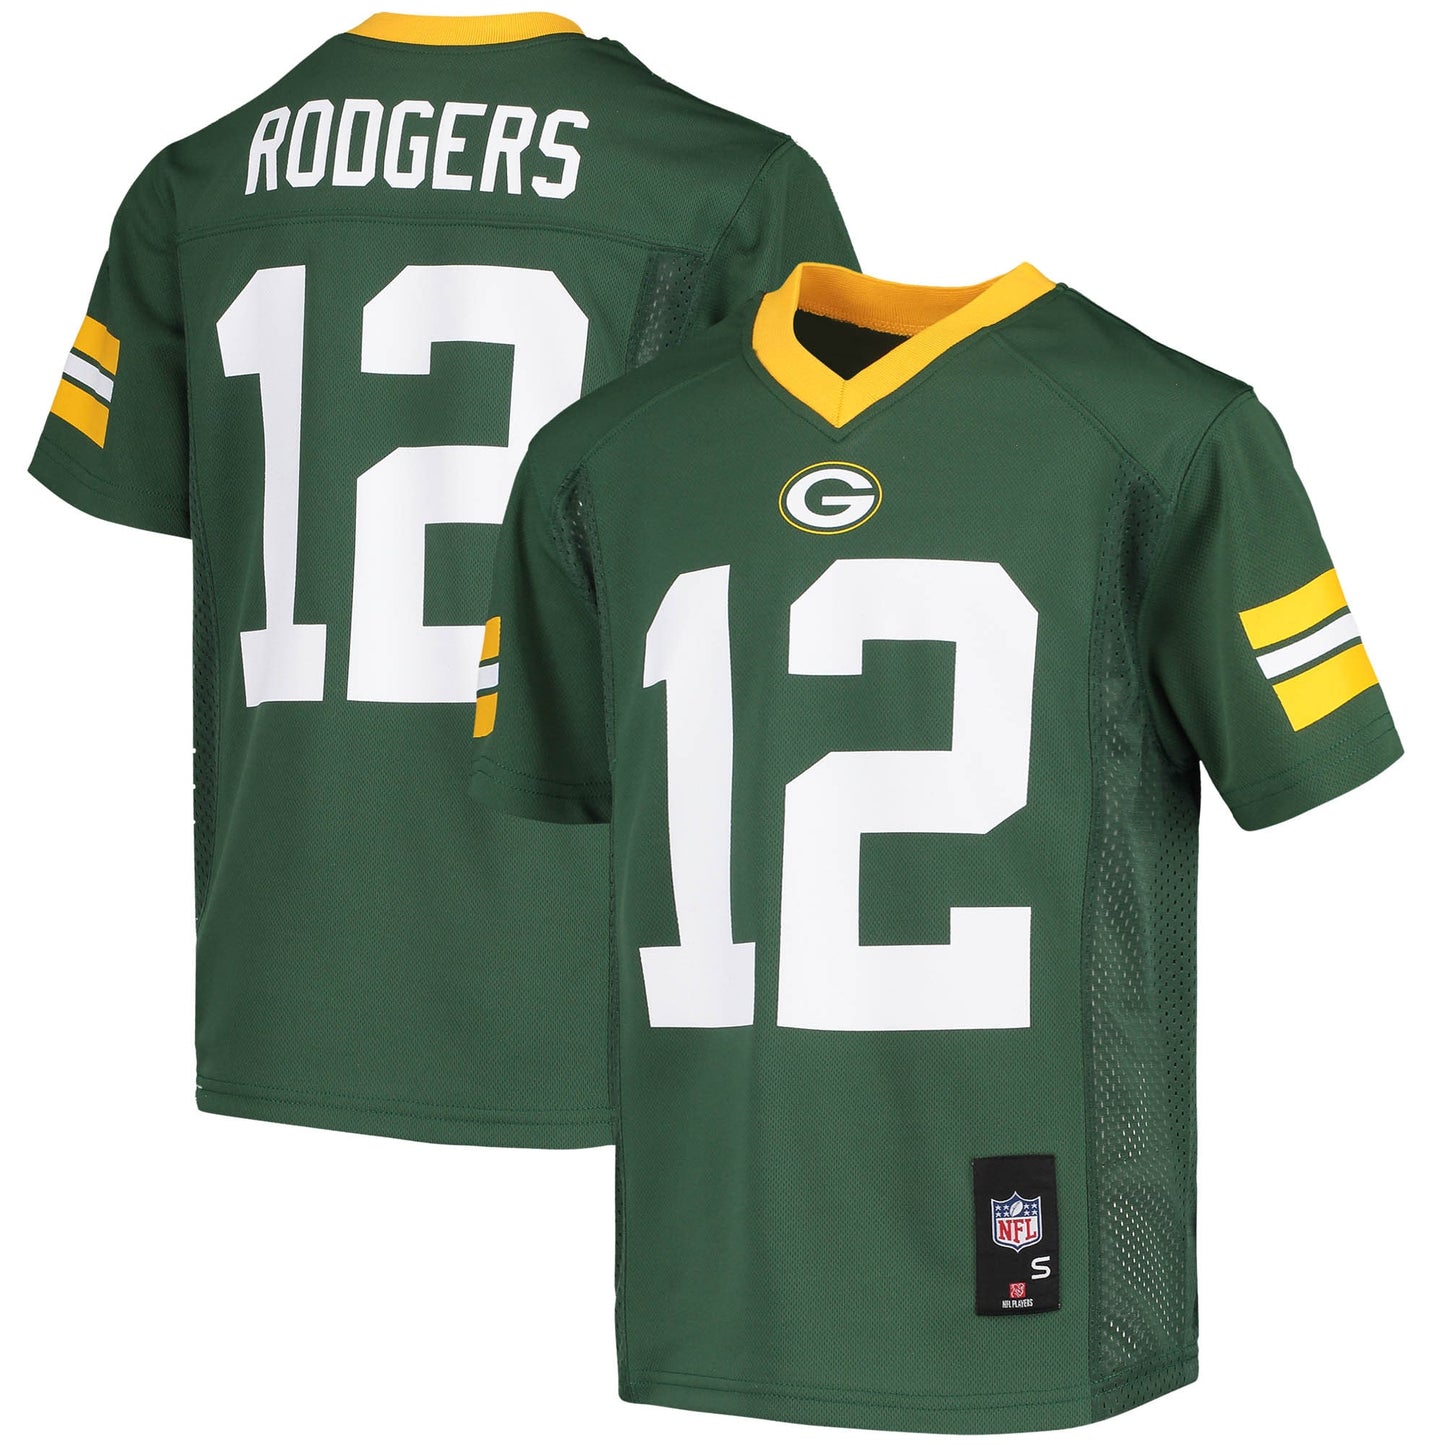 Aaron Rodgers Green Bay Packers Youth Replica Player Jersey - Green